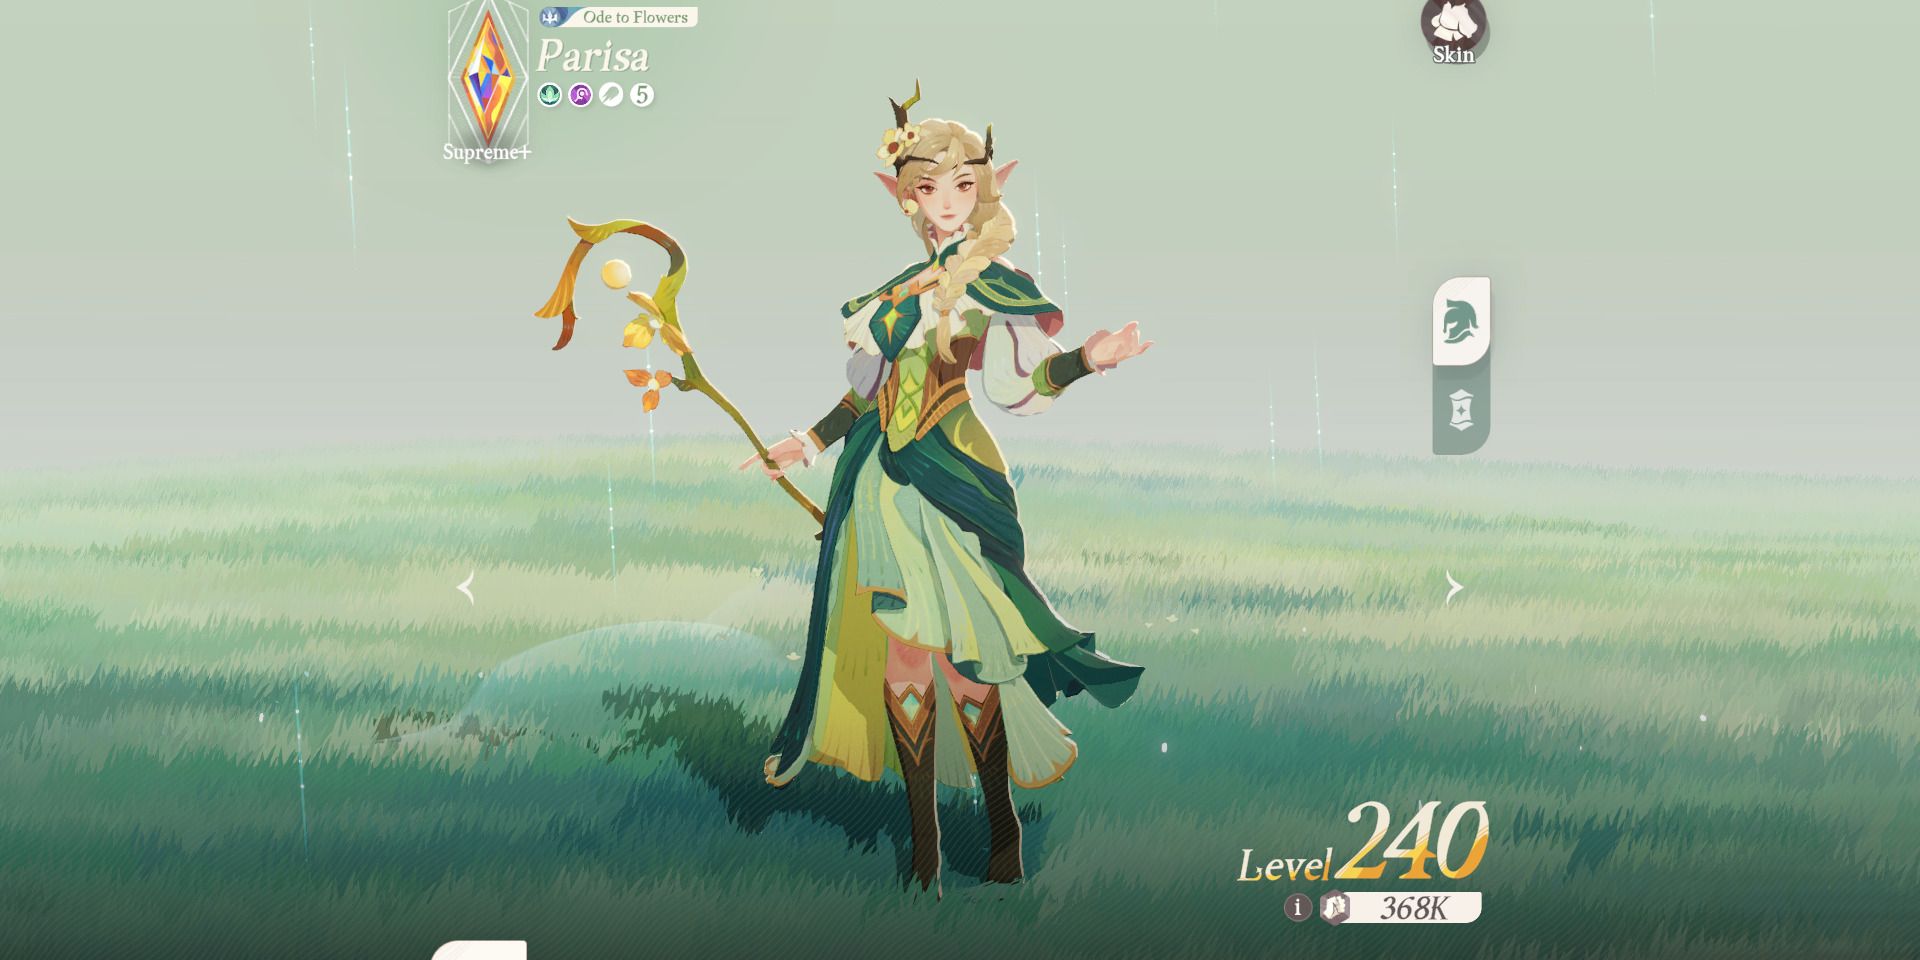 Image of the mage character Parisa in AFK Journey